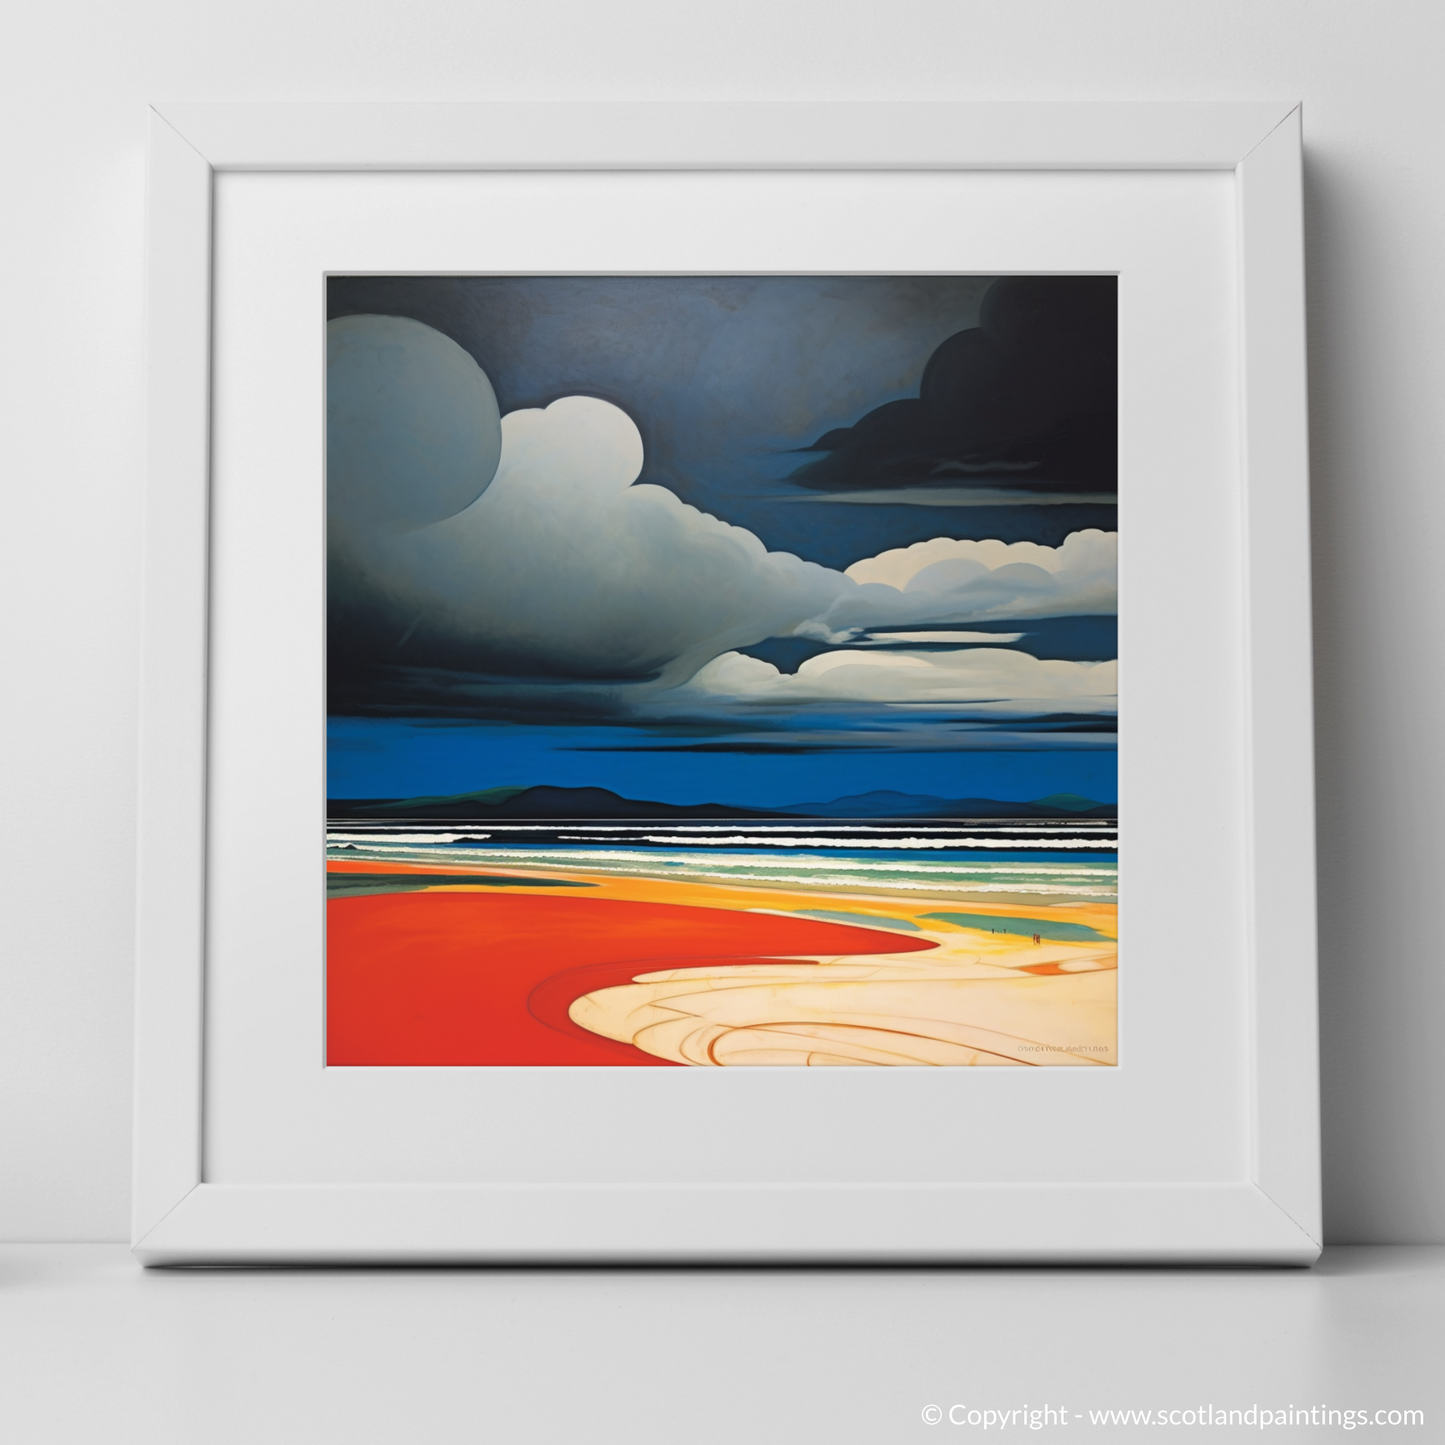 Stormy Encounter at Nairn Beach: A Pop Art Homage to Scottish Shores